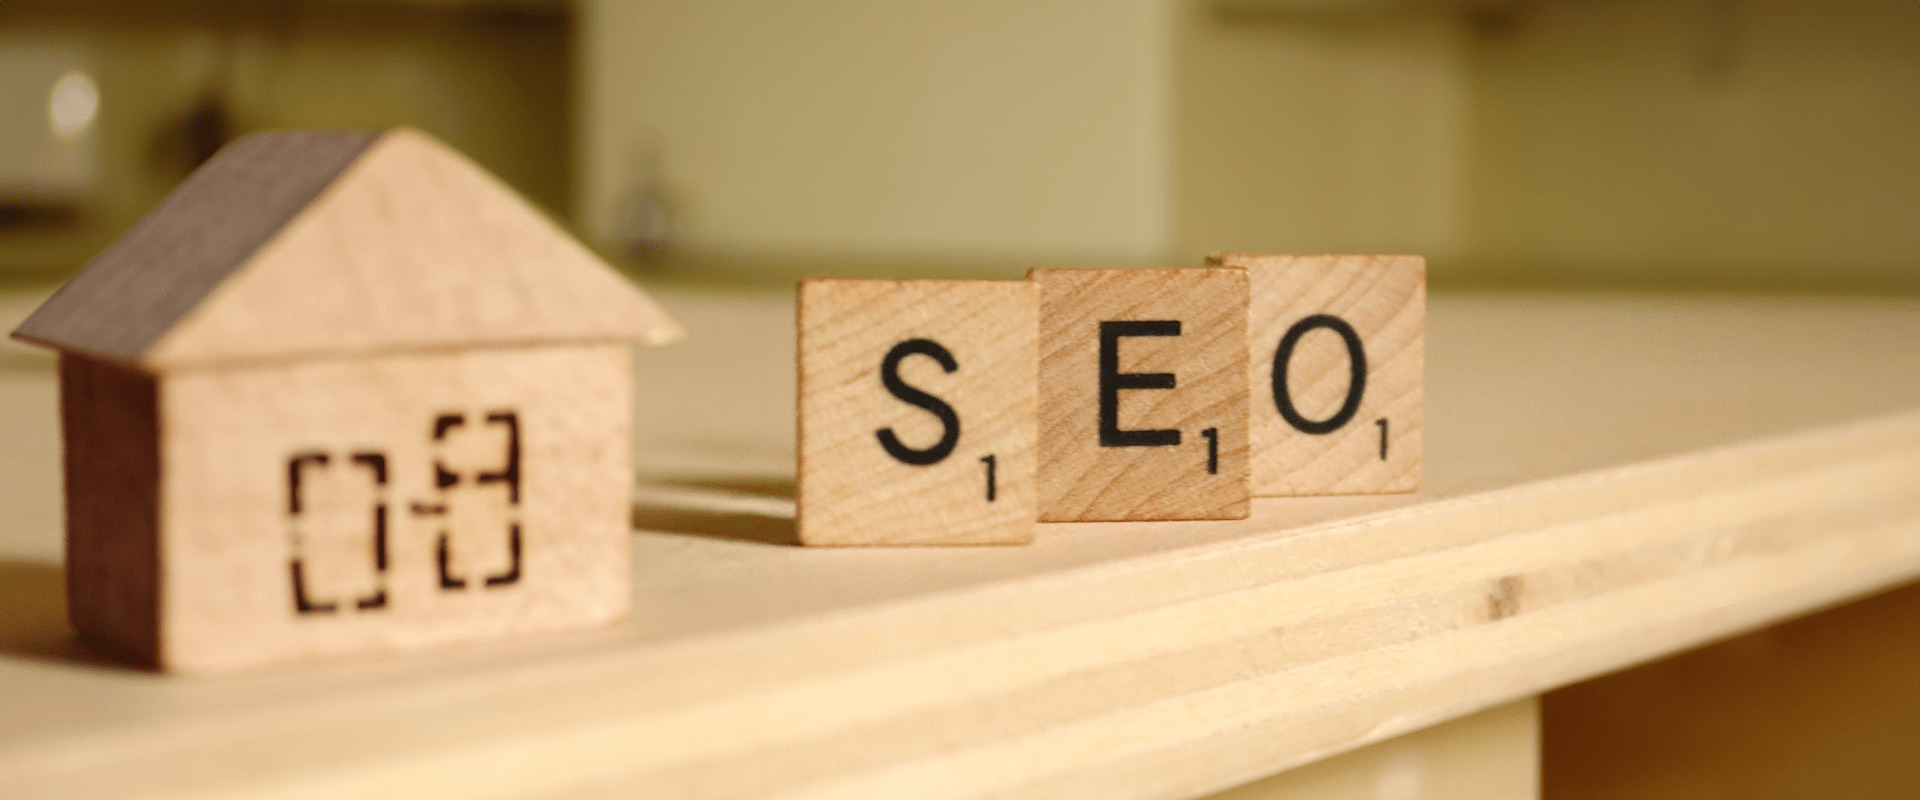 Read our guide on Real Estate SEO to learn how you can drive business growth by enhancing your online presence